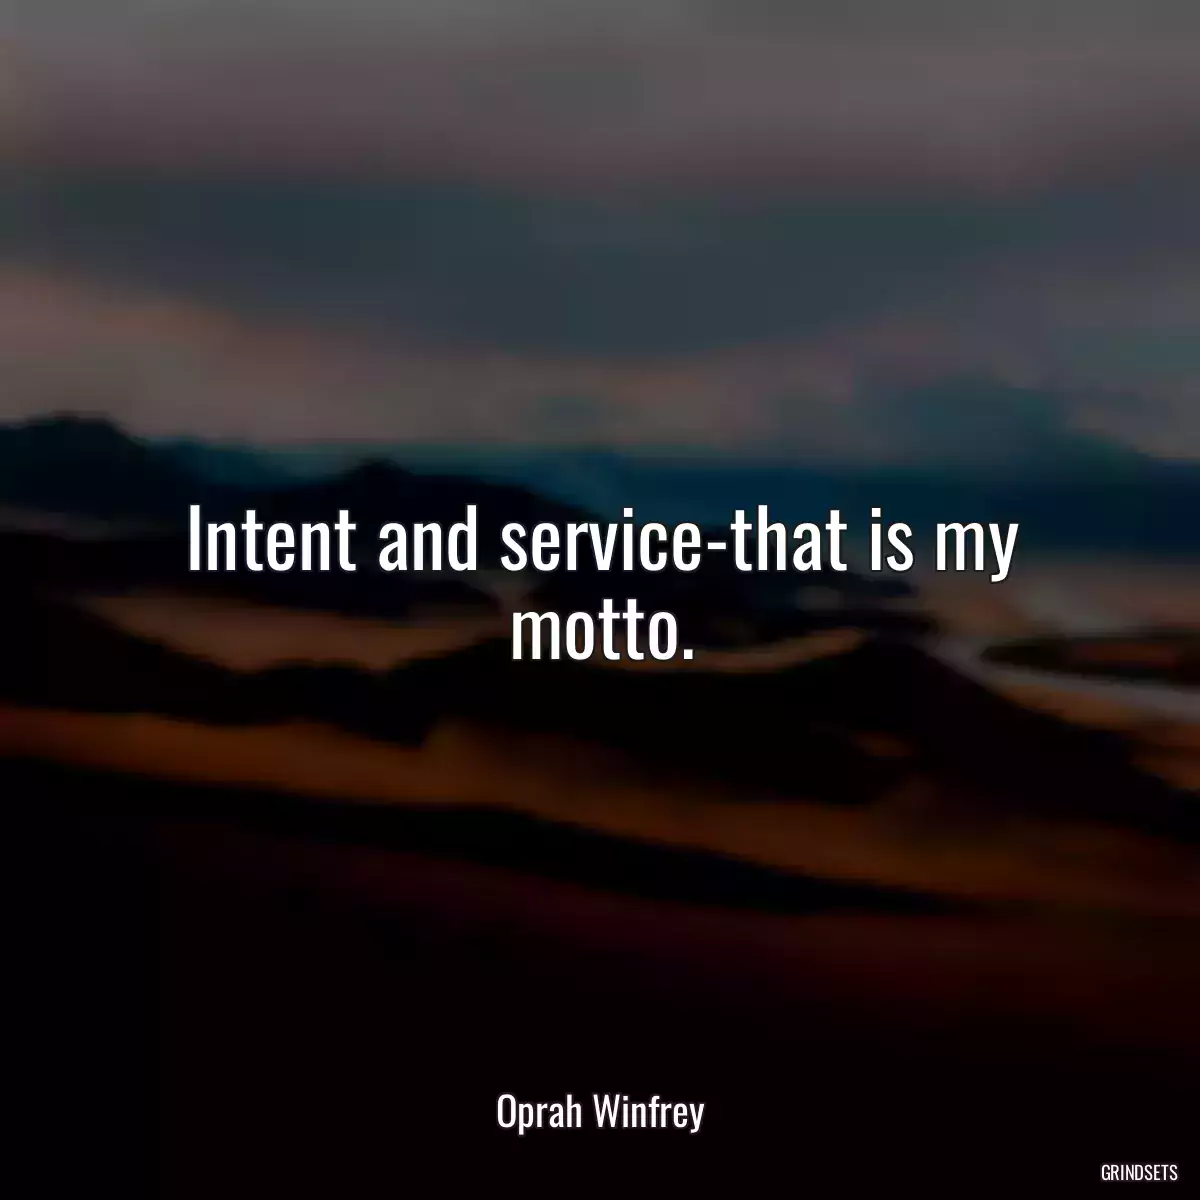 Intent and service-that is my motto.